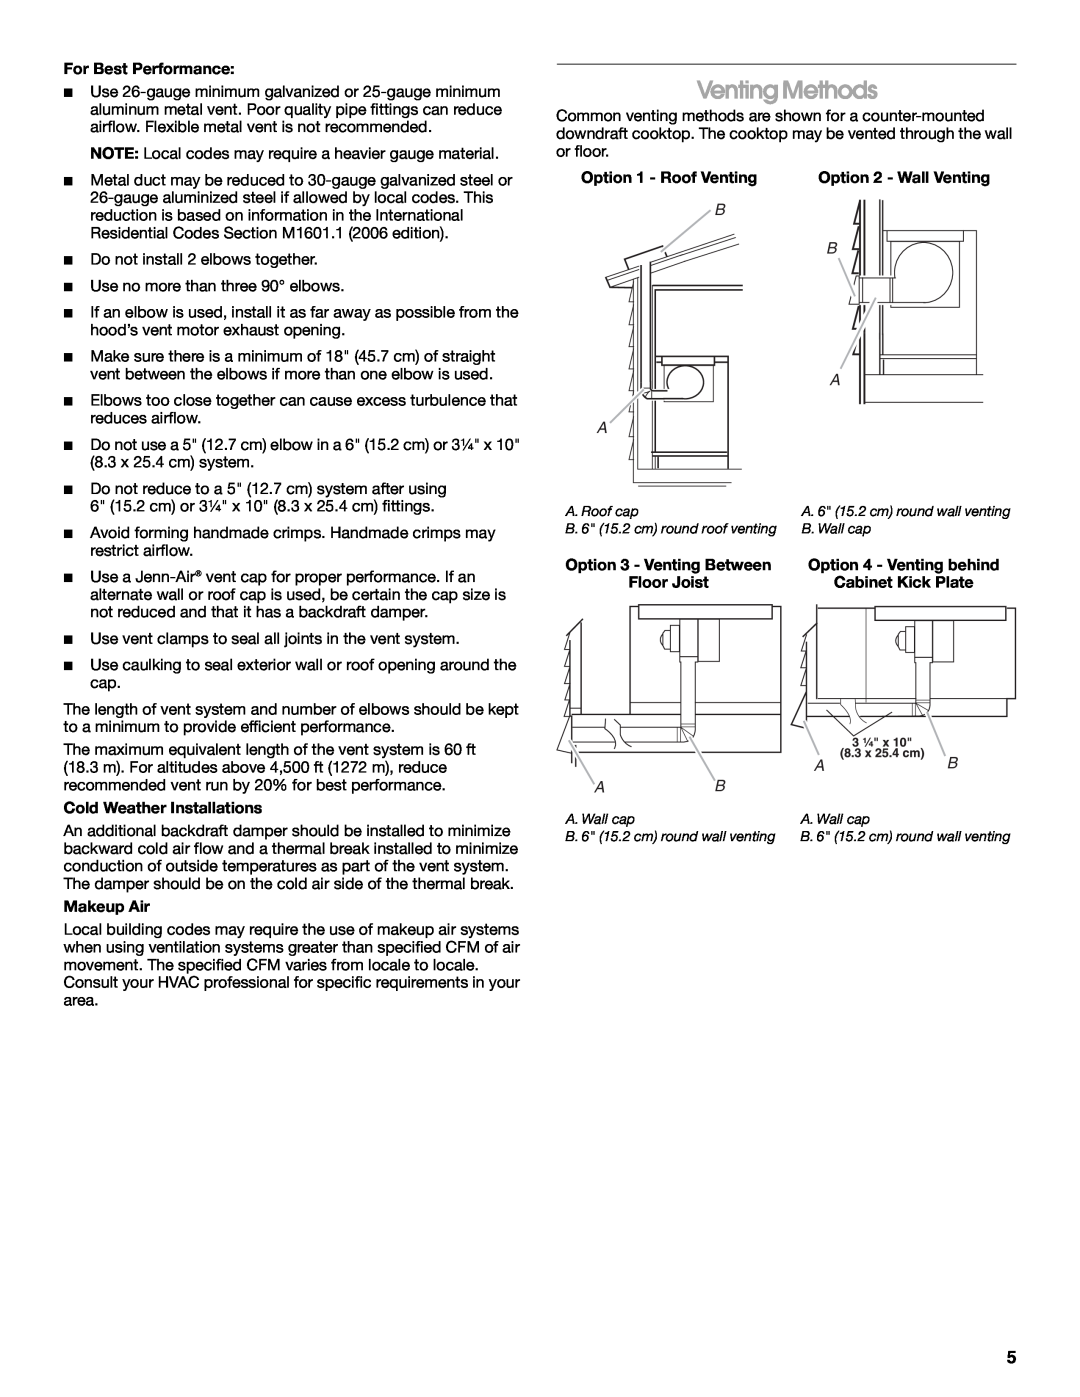 Jenn-Air W10436037B Venting Methods, For Best Performance, Option 1 - Roof Venting, Option 2 - Wall Venting, B B A A 